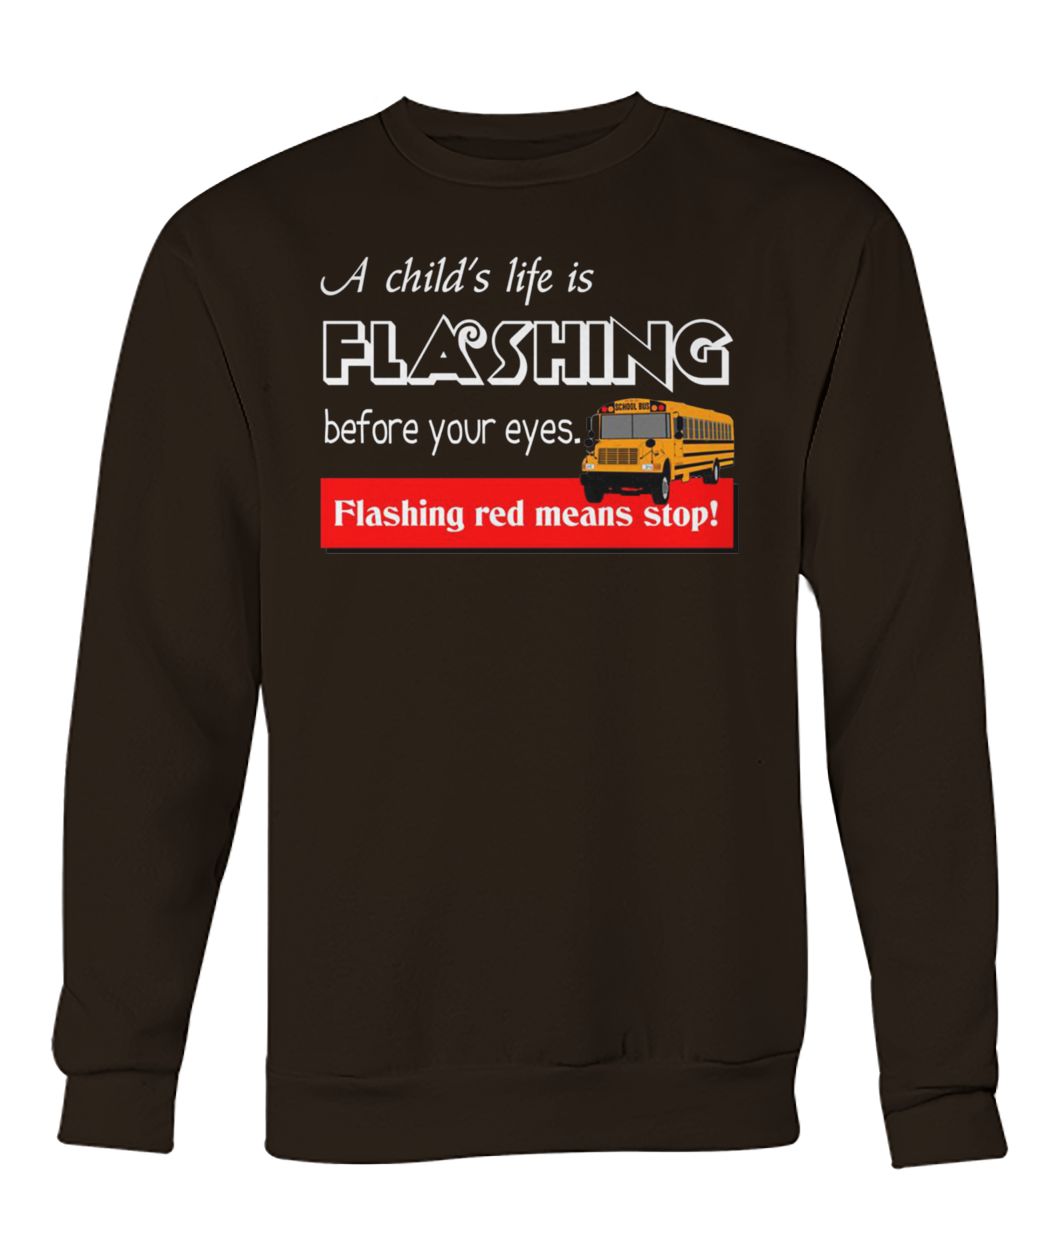 A child's life is flashing before your eyes flashing red means stop school bus driver crew neck sweatshirt